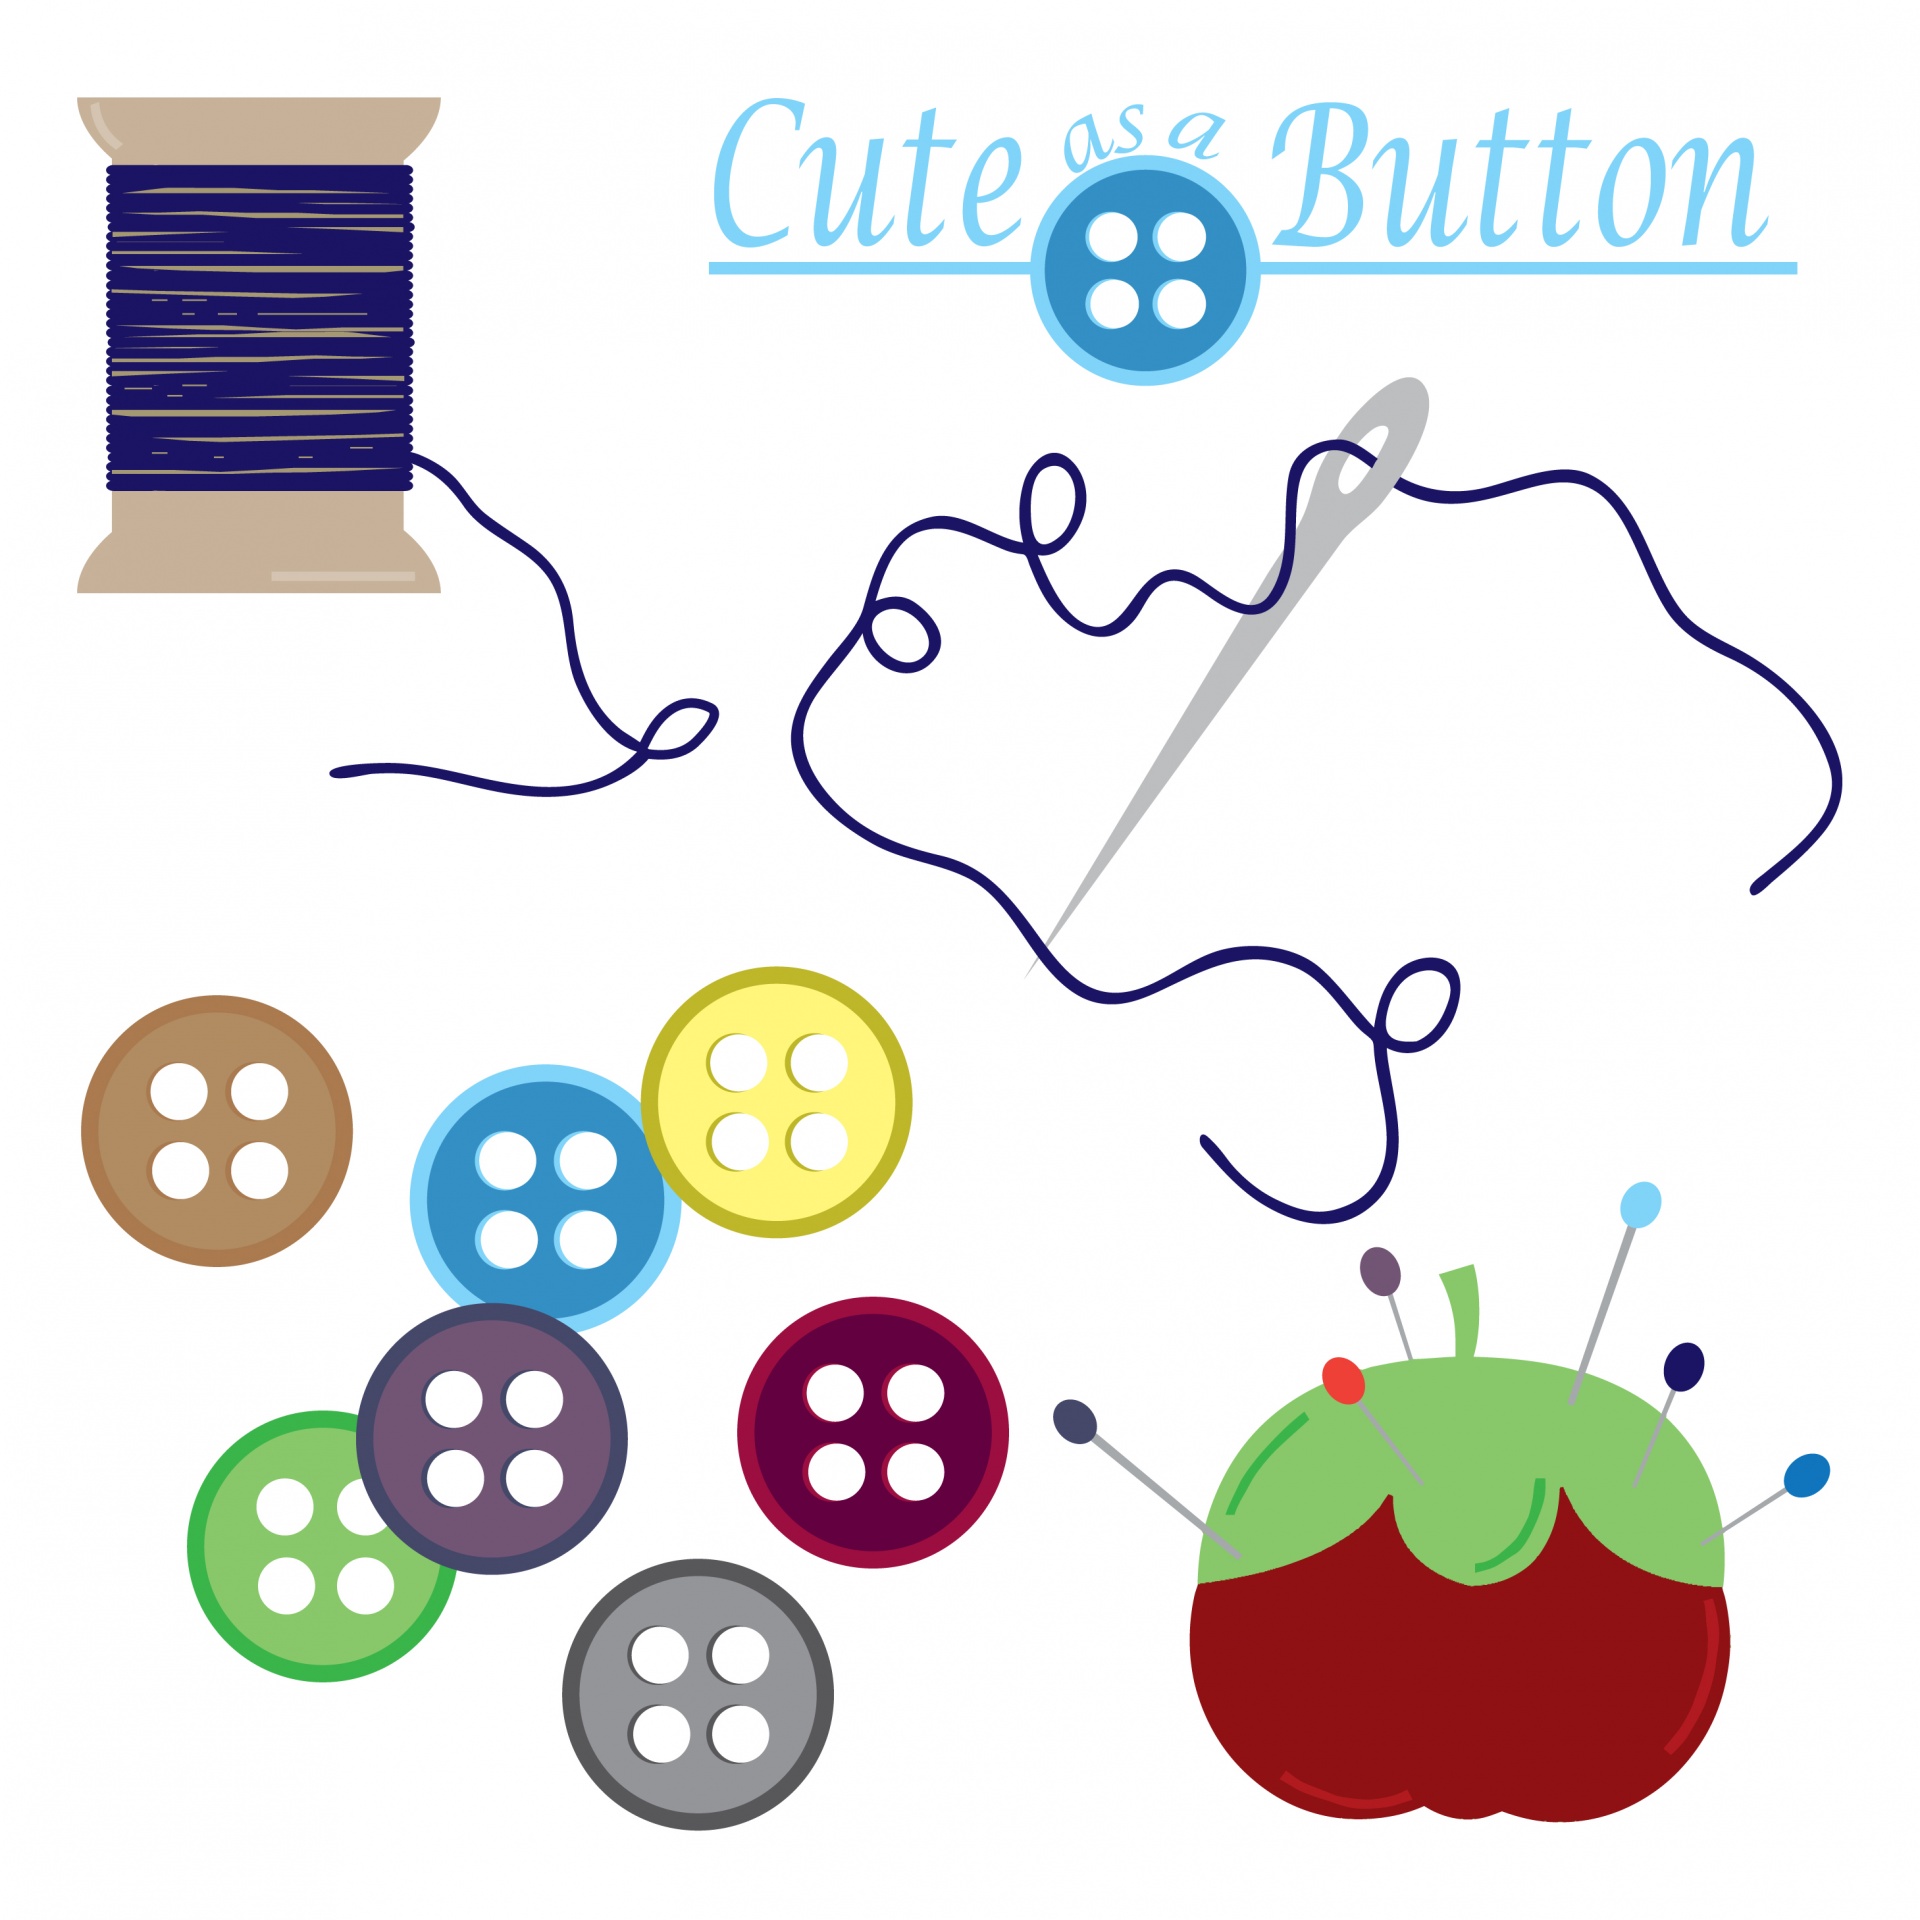 Cute sewing set of buttons, needle, thread, cotton reel, illustration